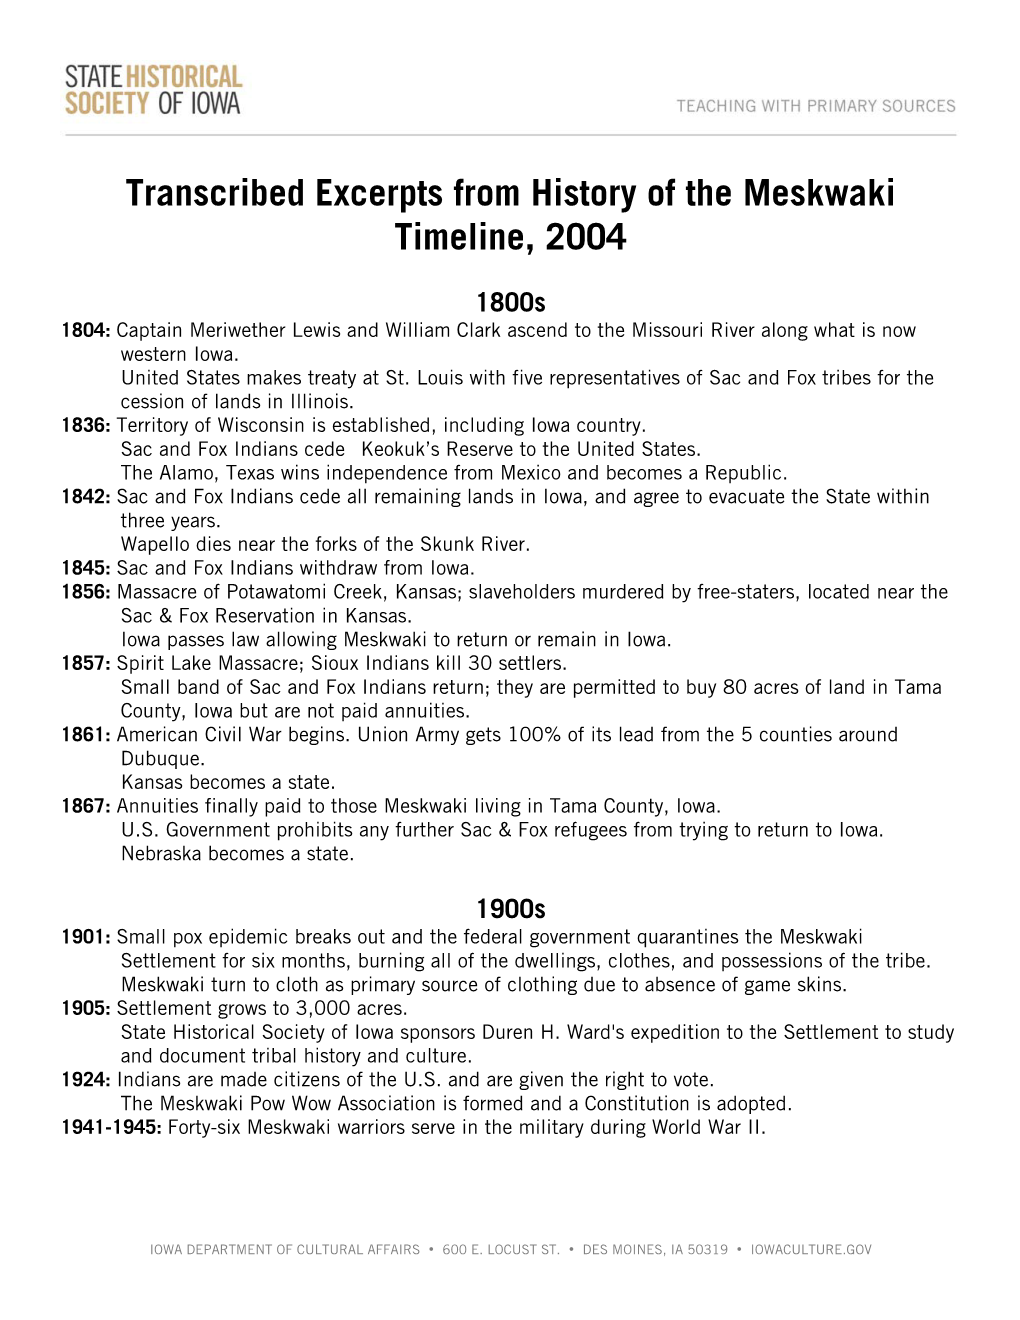 Transcribed Excerpts from History of the Meskwaki Timeline, 2004